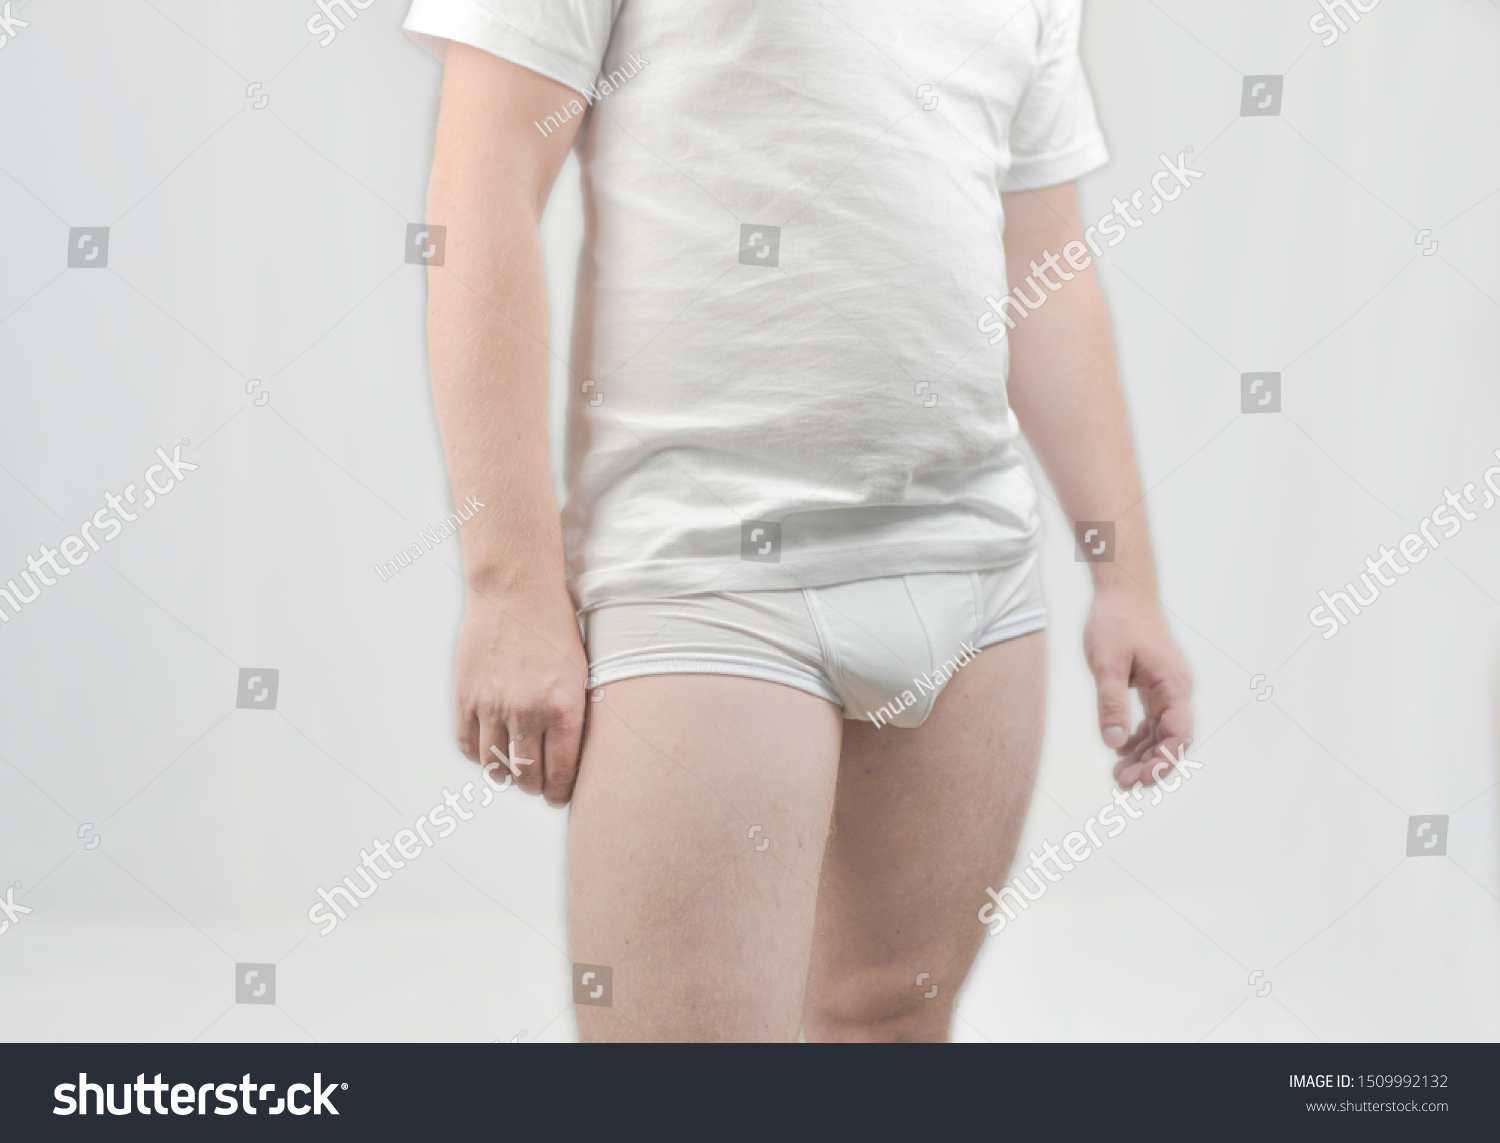 A guy standing in white shorts and a white T-shirt #1509992132